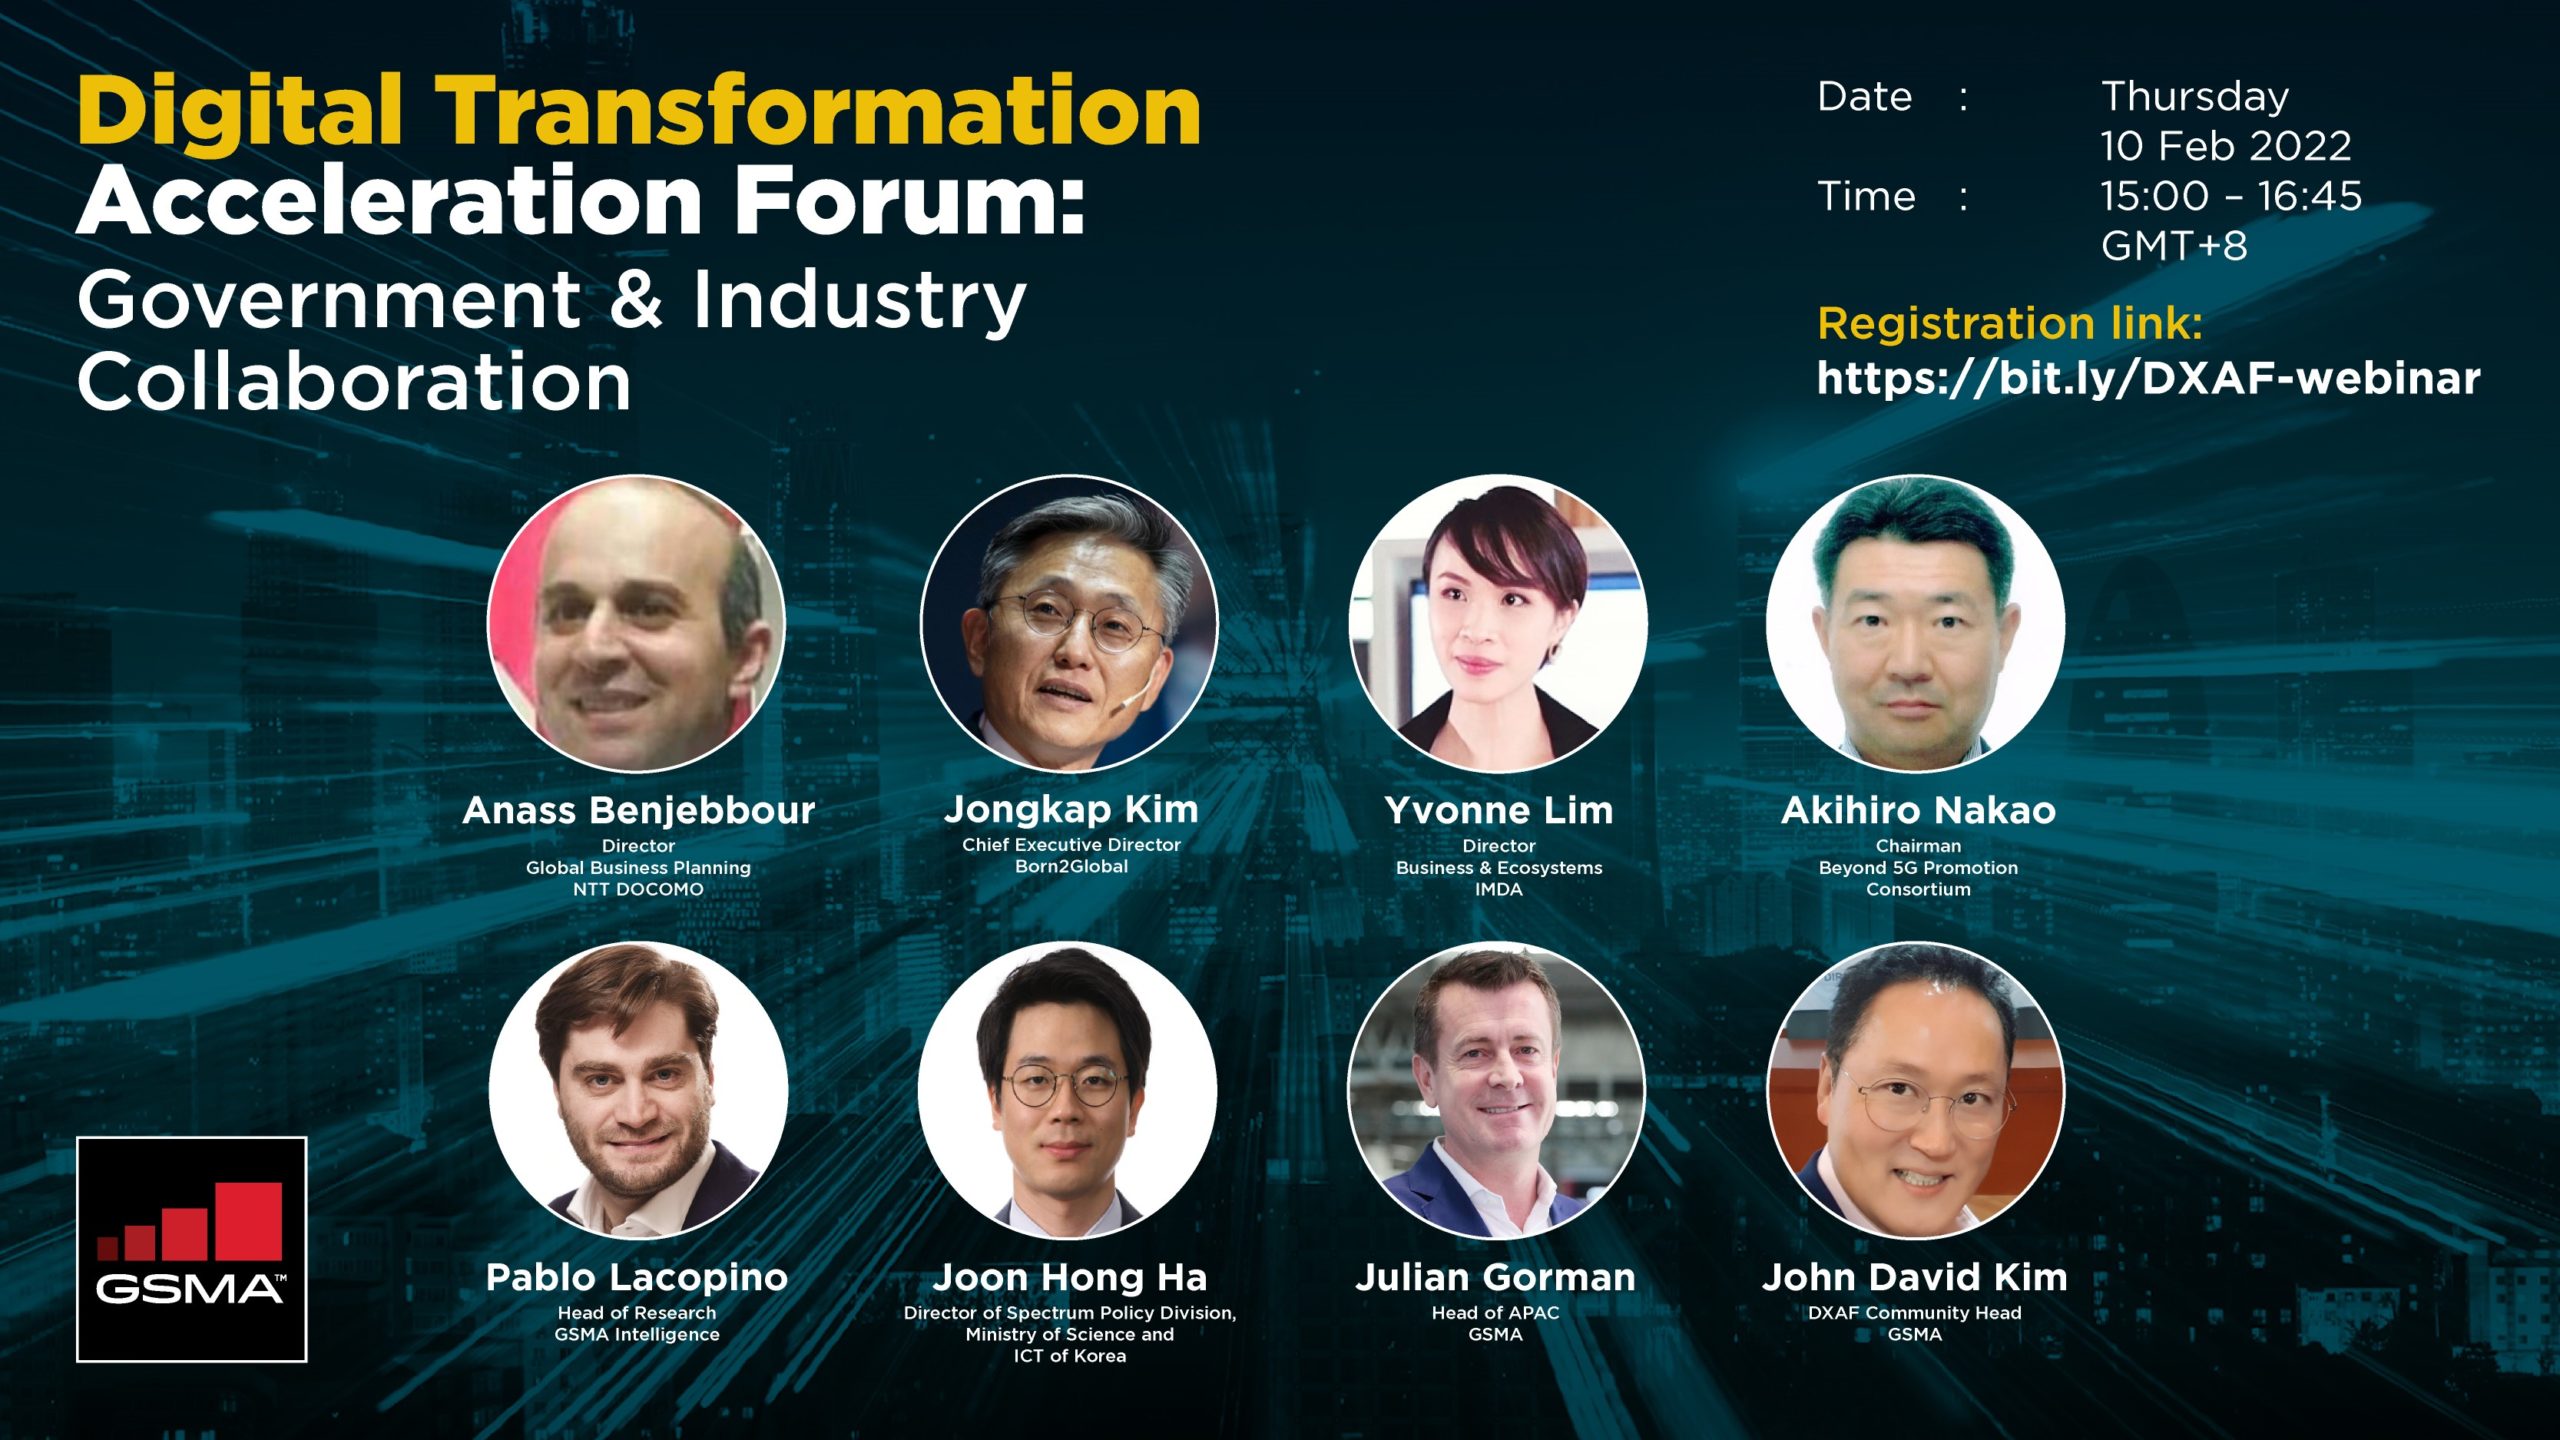 Digital Transformation Acceleration Forum – Government & Industry Collaboration